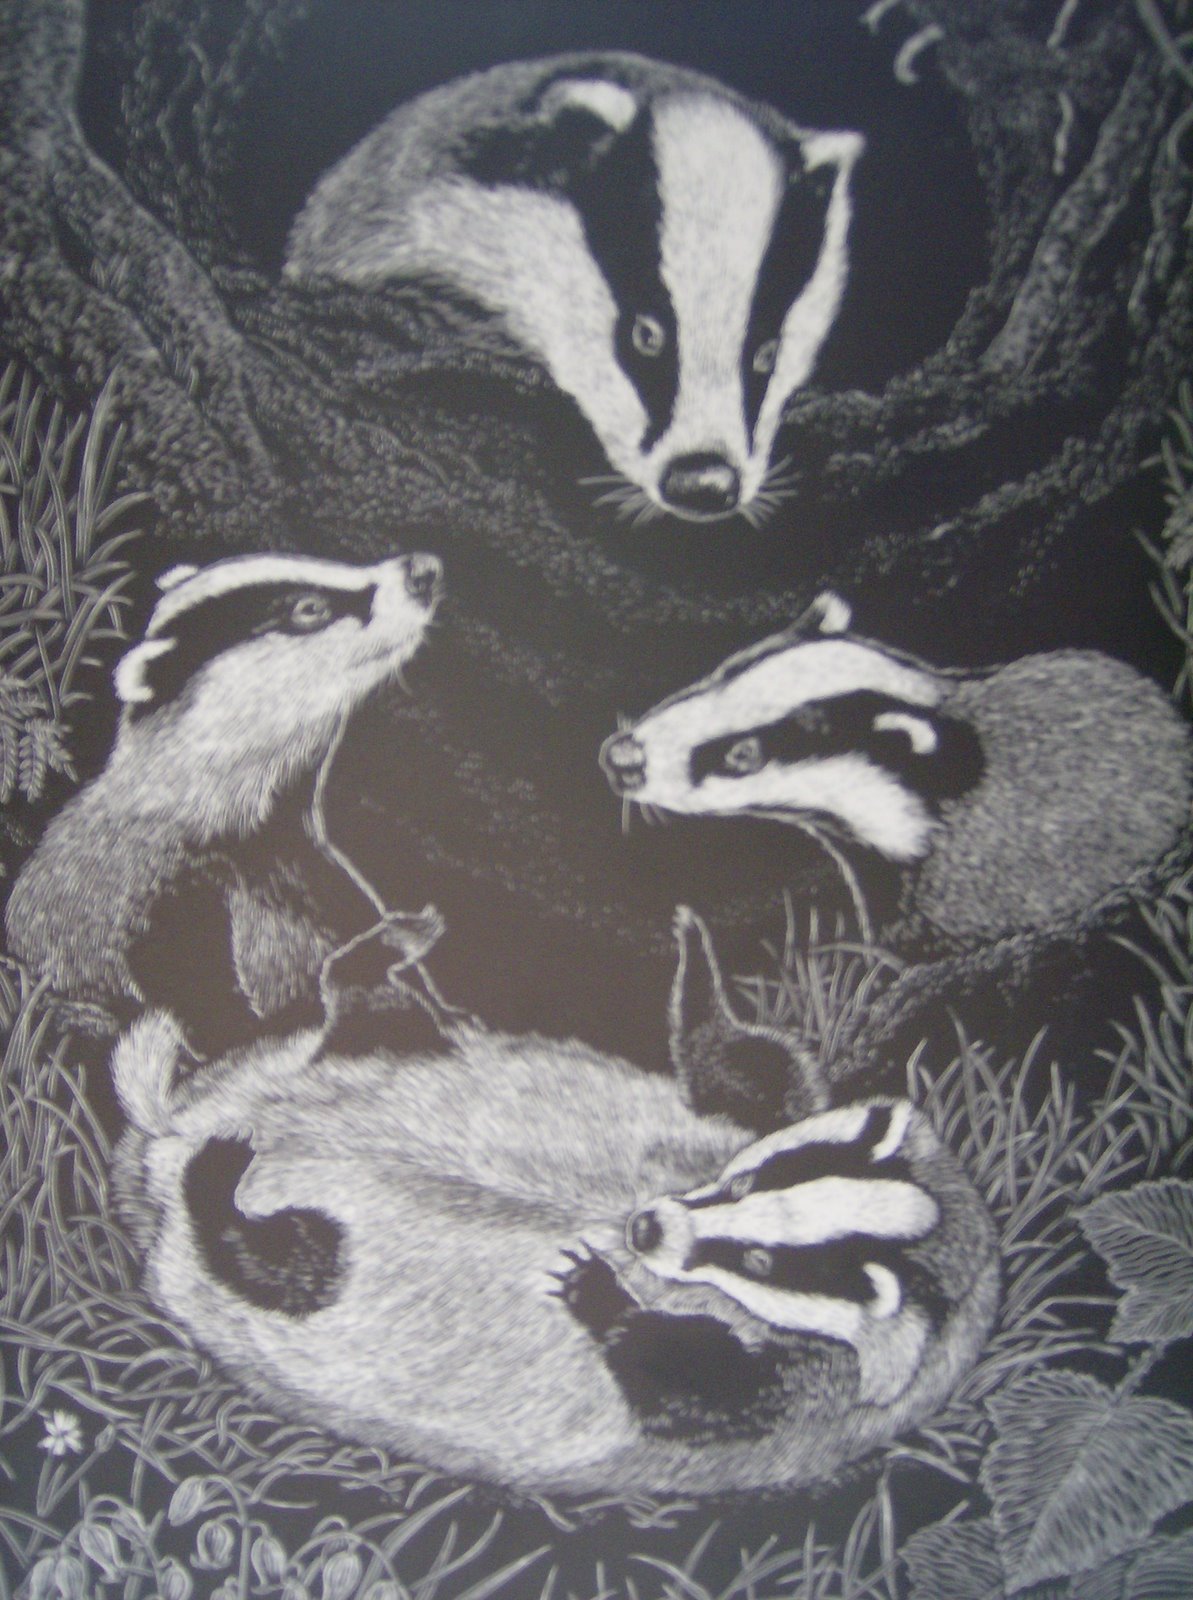 [badger+with+cubs+at+play+2+71.JPG]